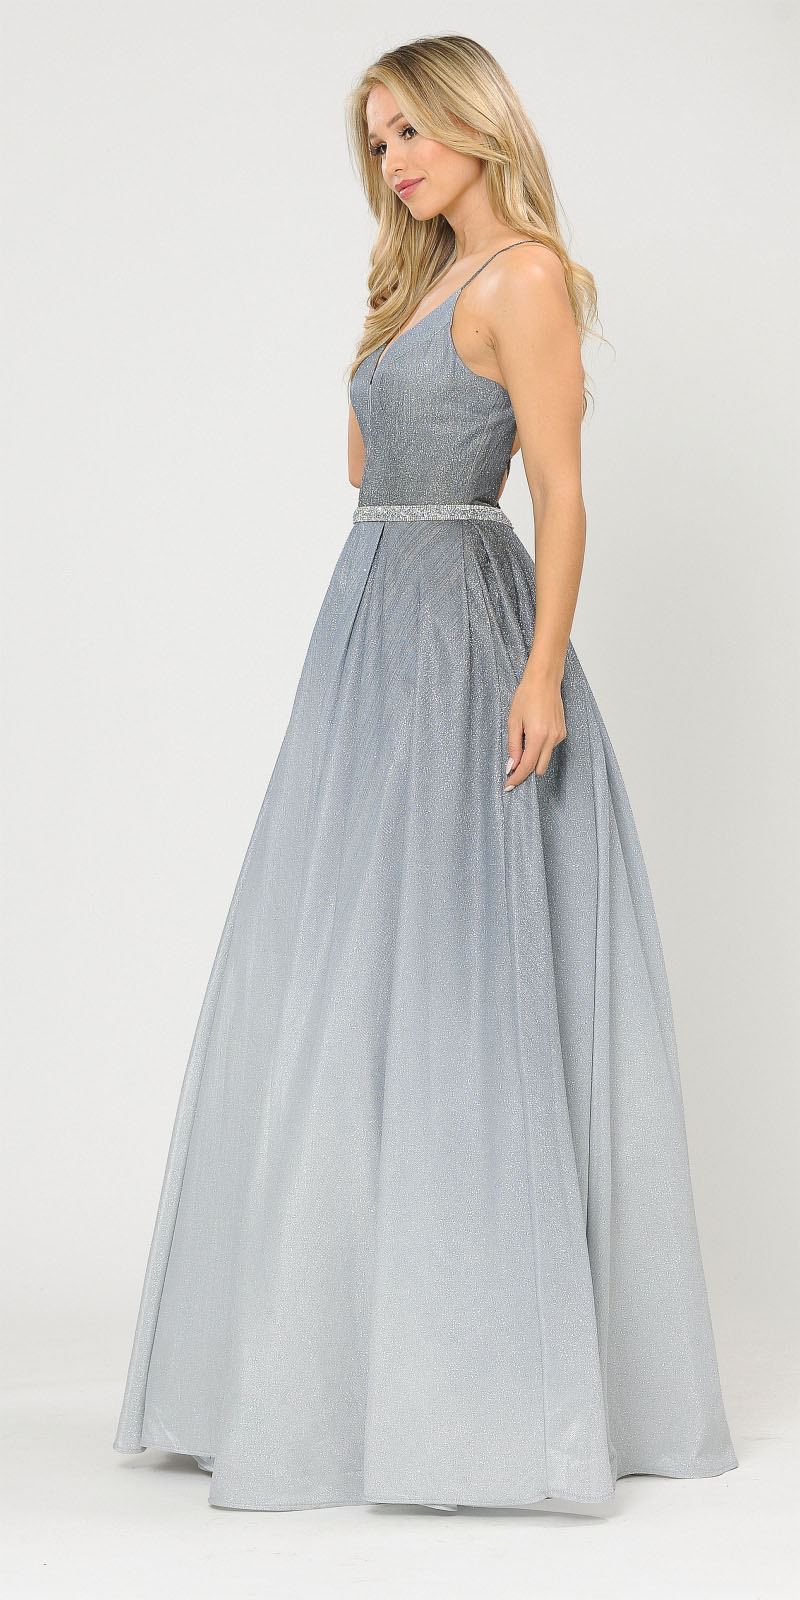 Gun Metal Lace-Up Back Ombre Prom Ball Gown with Pockets